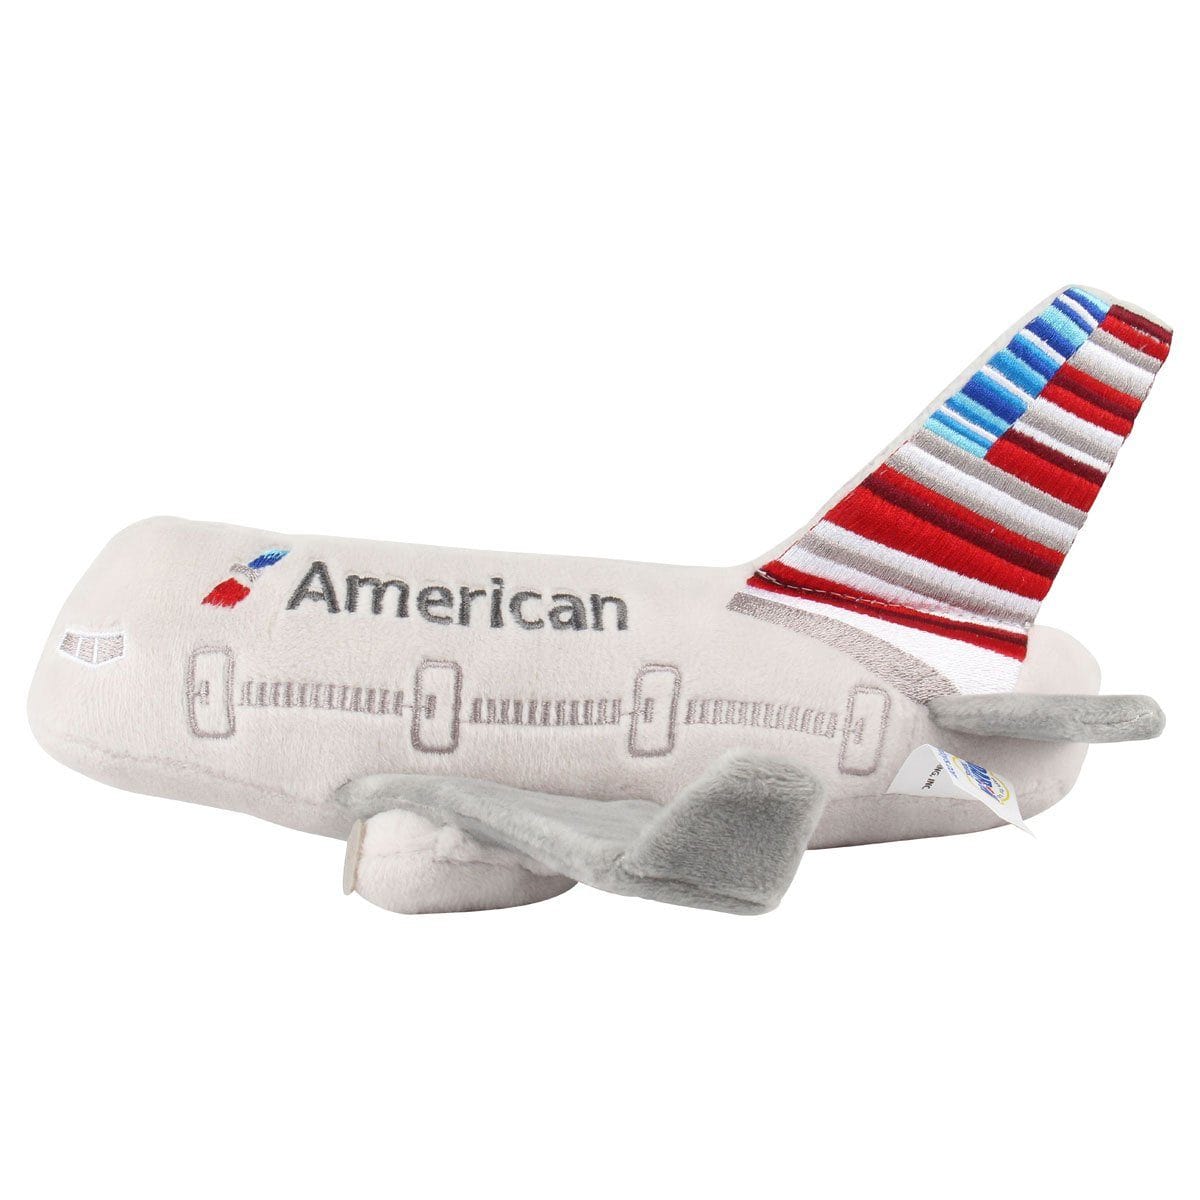 American Airlines Plush Airplane Toy